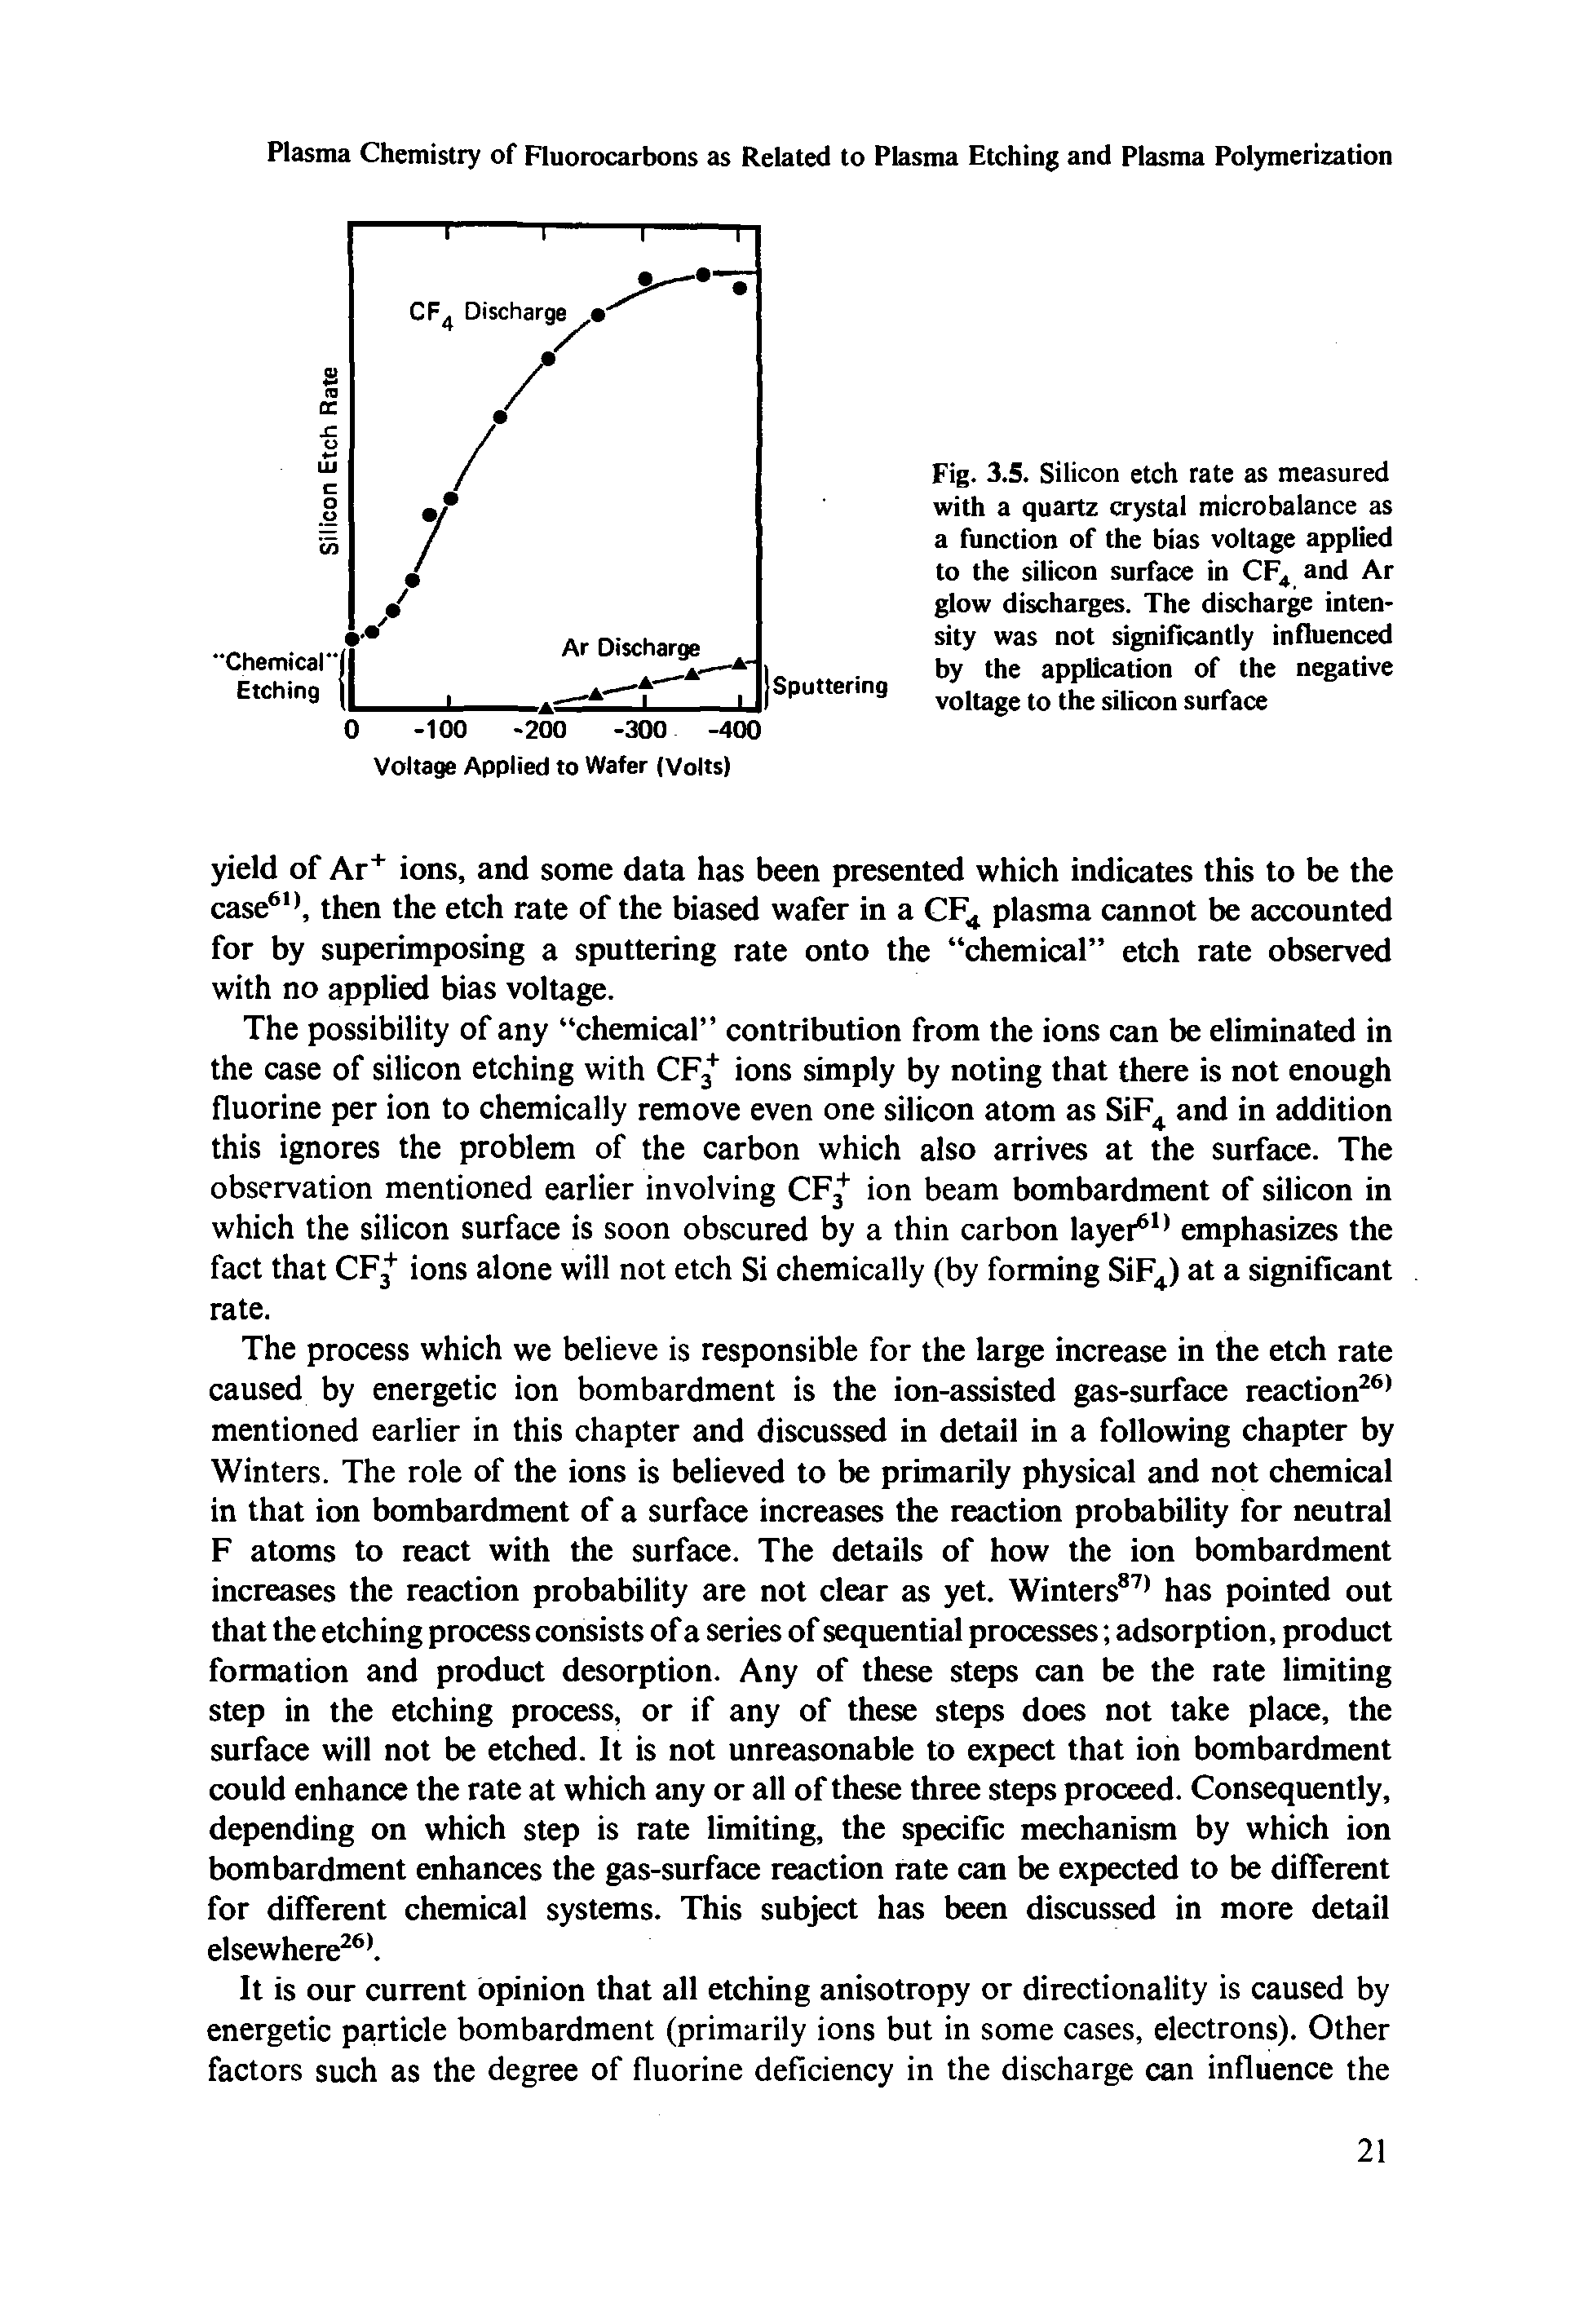 Fig. 3.5. Silicon etch rate as measured with a quartz crystal microbalance as a function of the bias voltage applied to the silicon surface in CF4 and Ar glow discharges. The discharge intensity was not significantly influenced by the application of the negative voltage to the silicon surface...